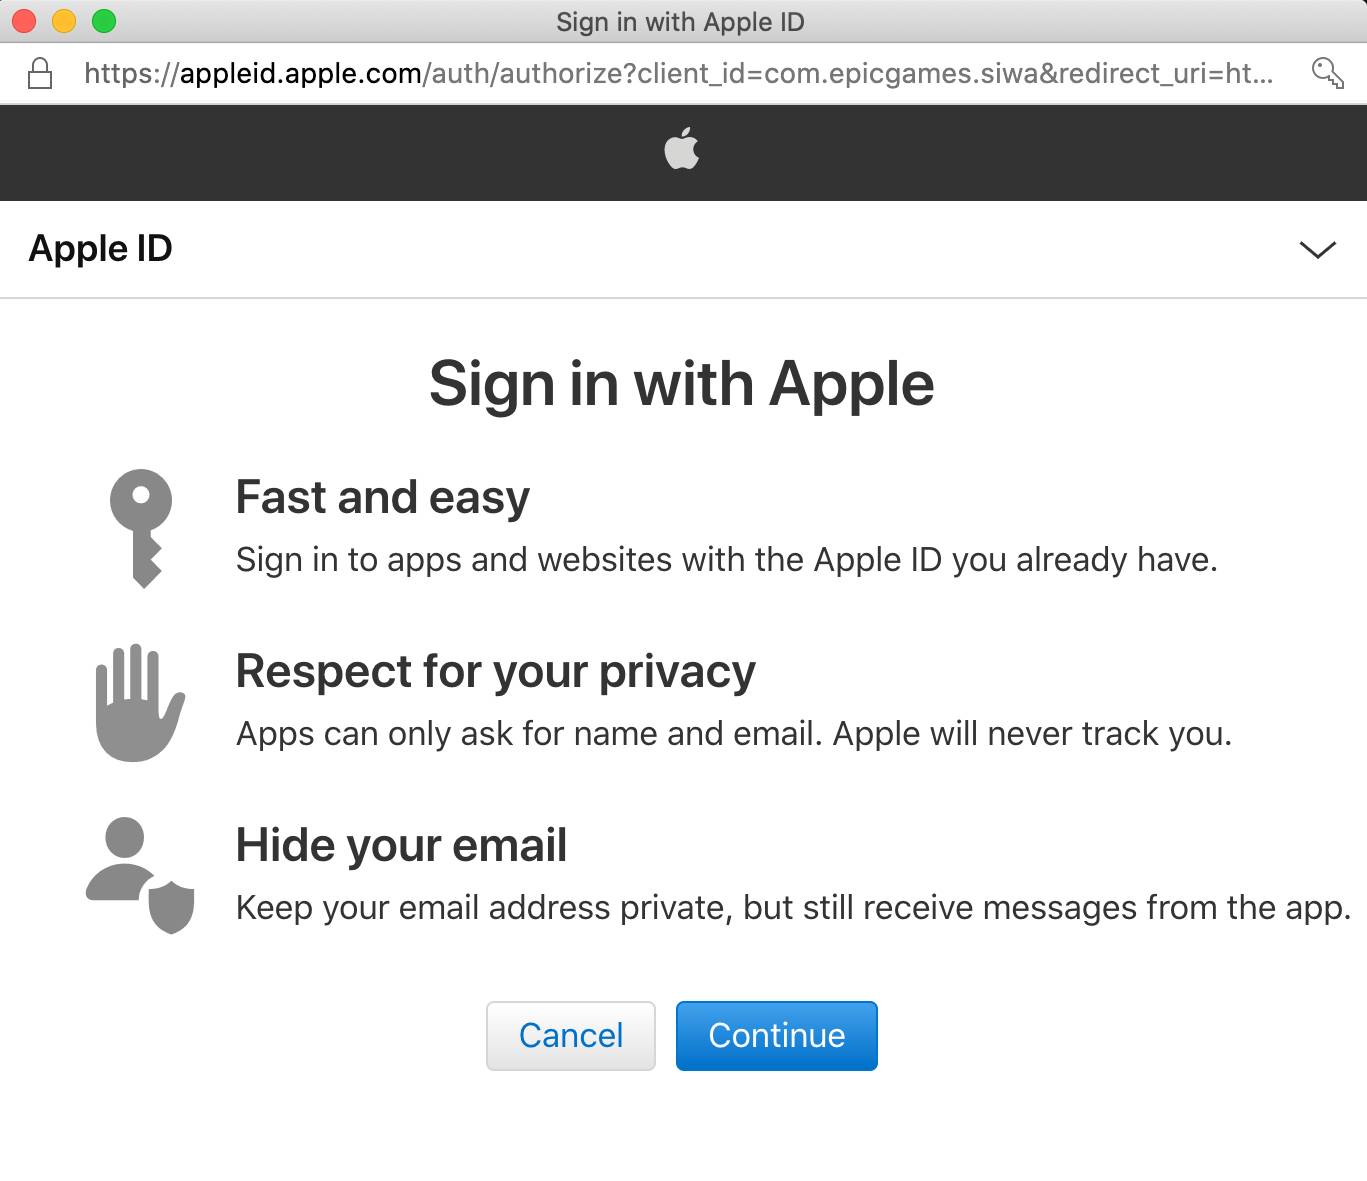 Epic Games warns users who sign in with Apple ID accounts will be